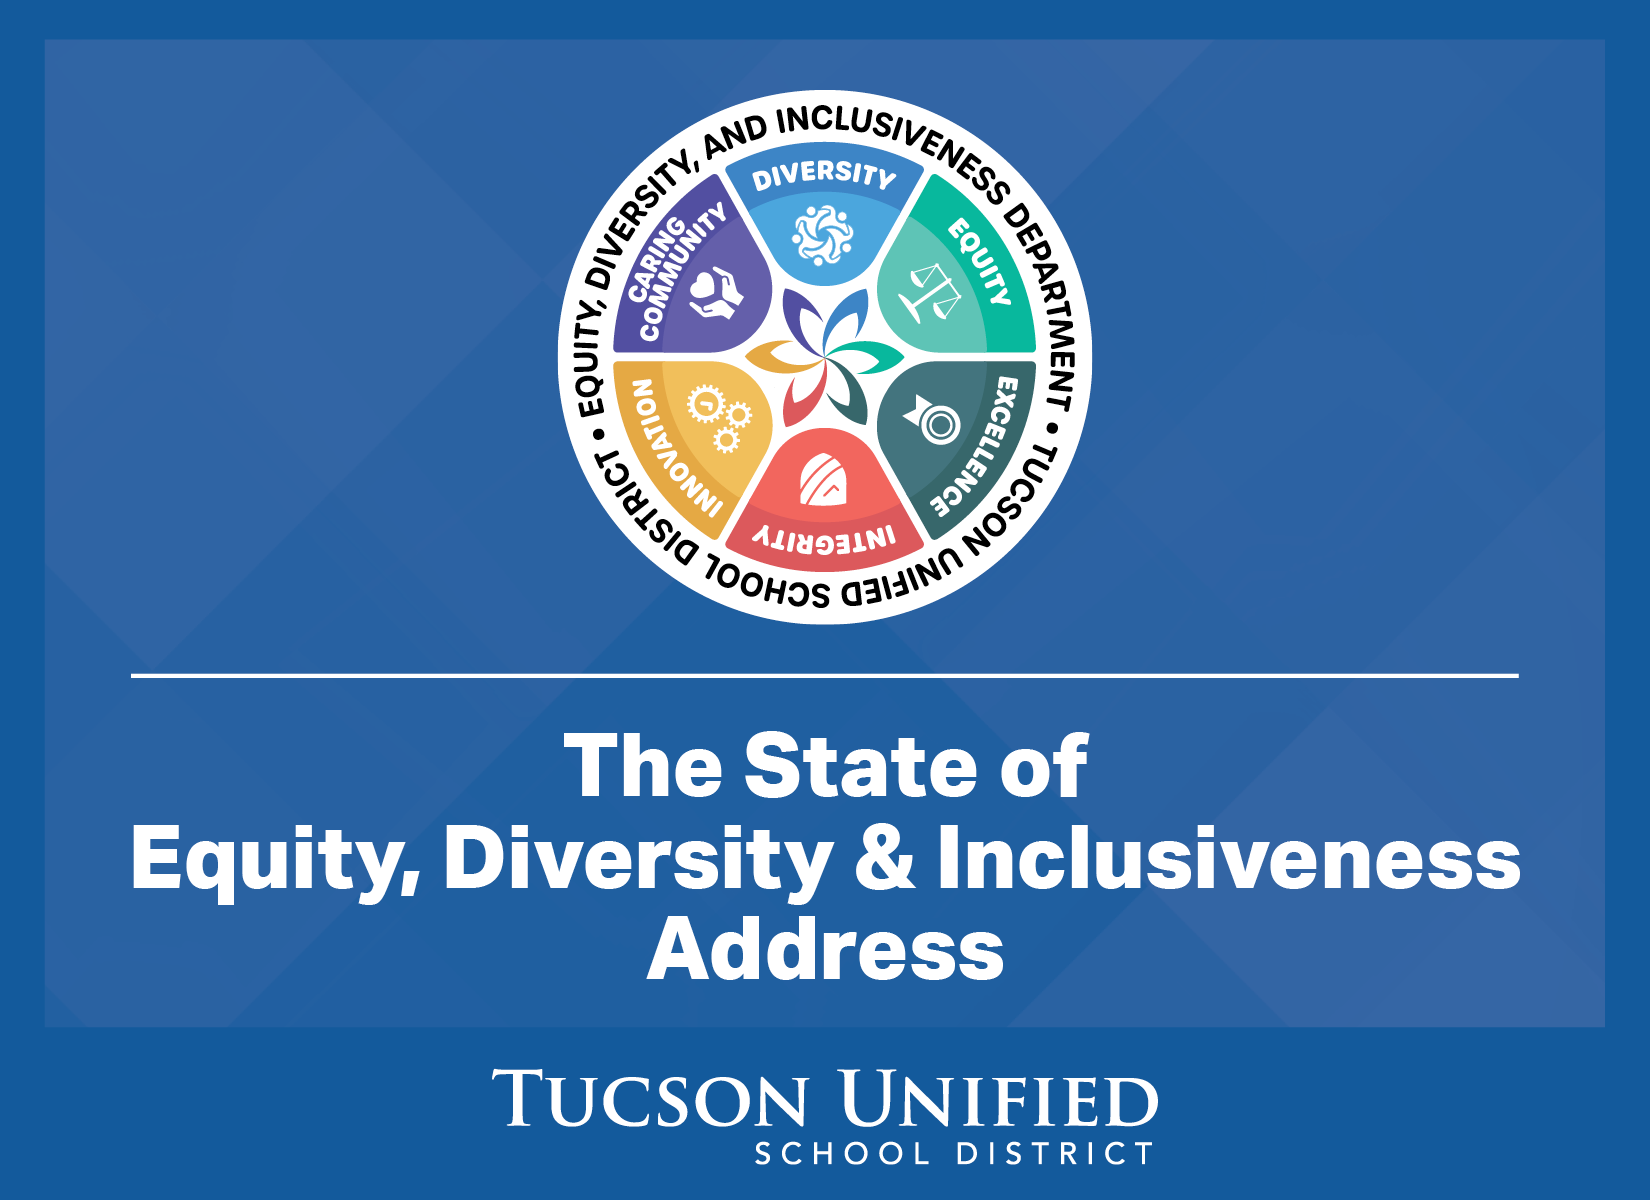 The State of Equity, Diversity and Inclusiveness Address